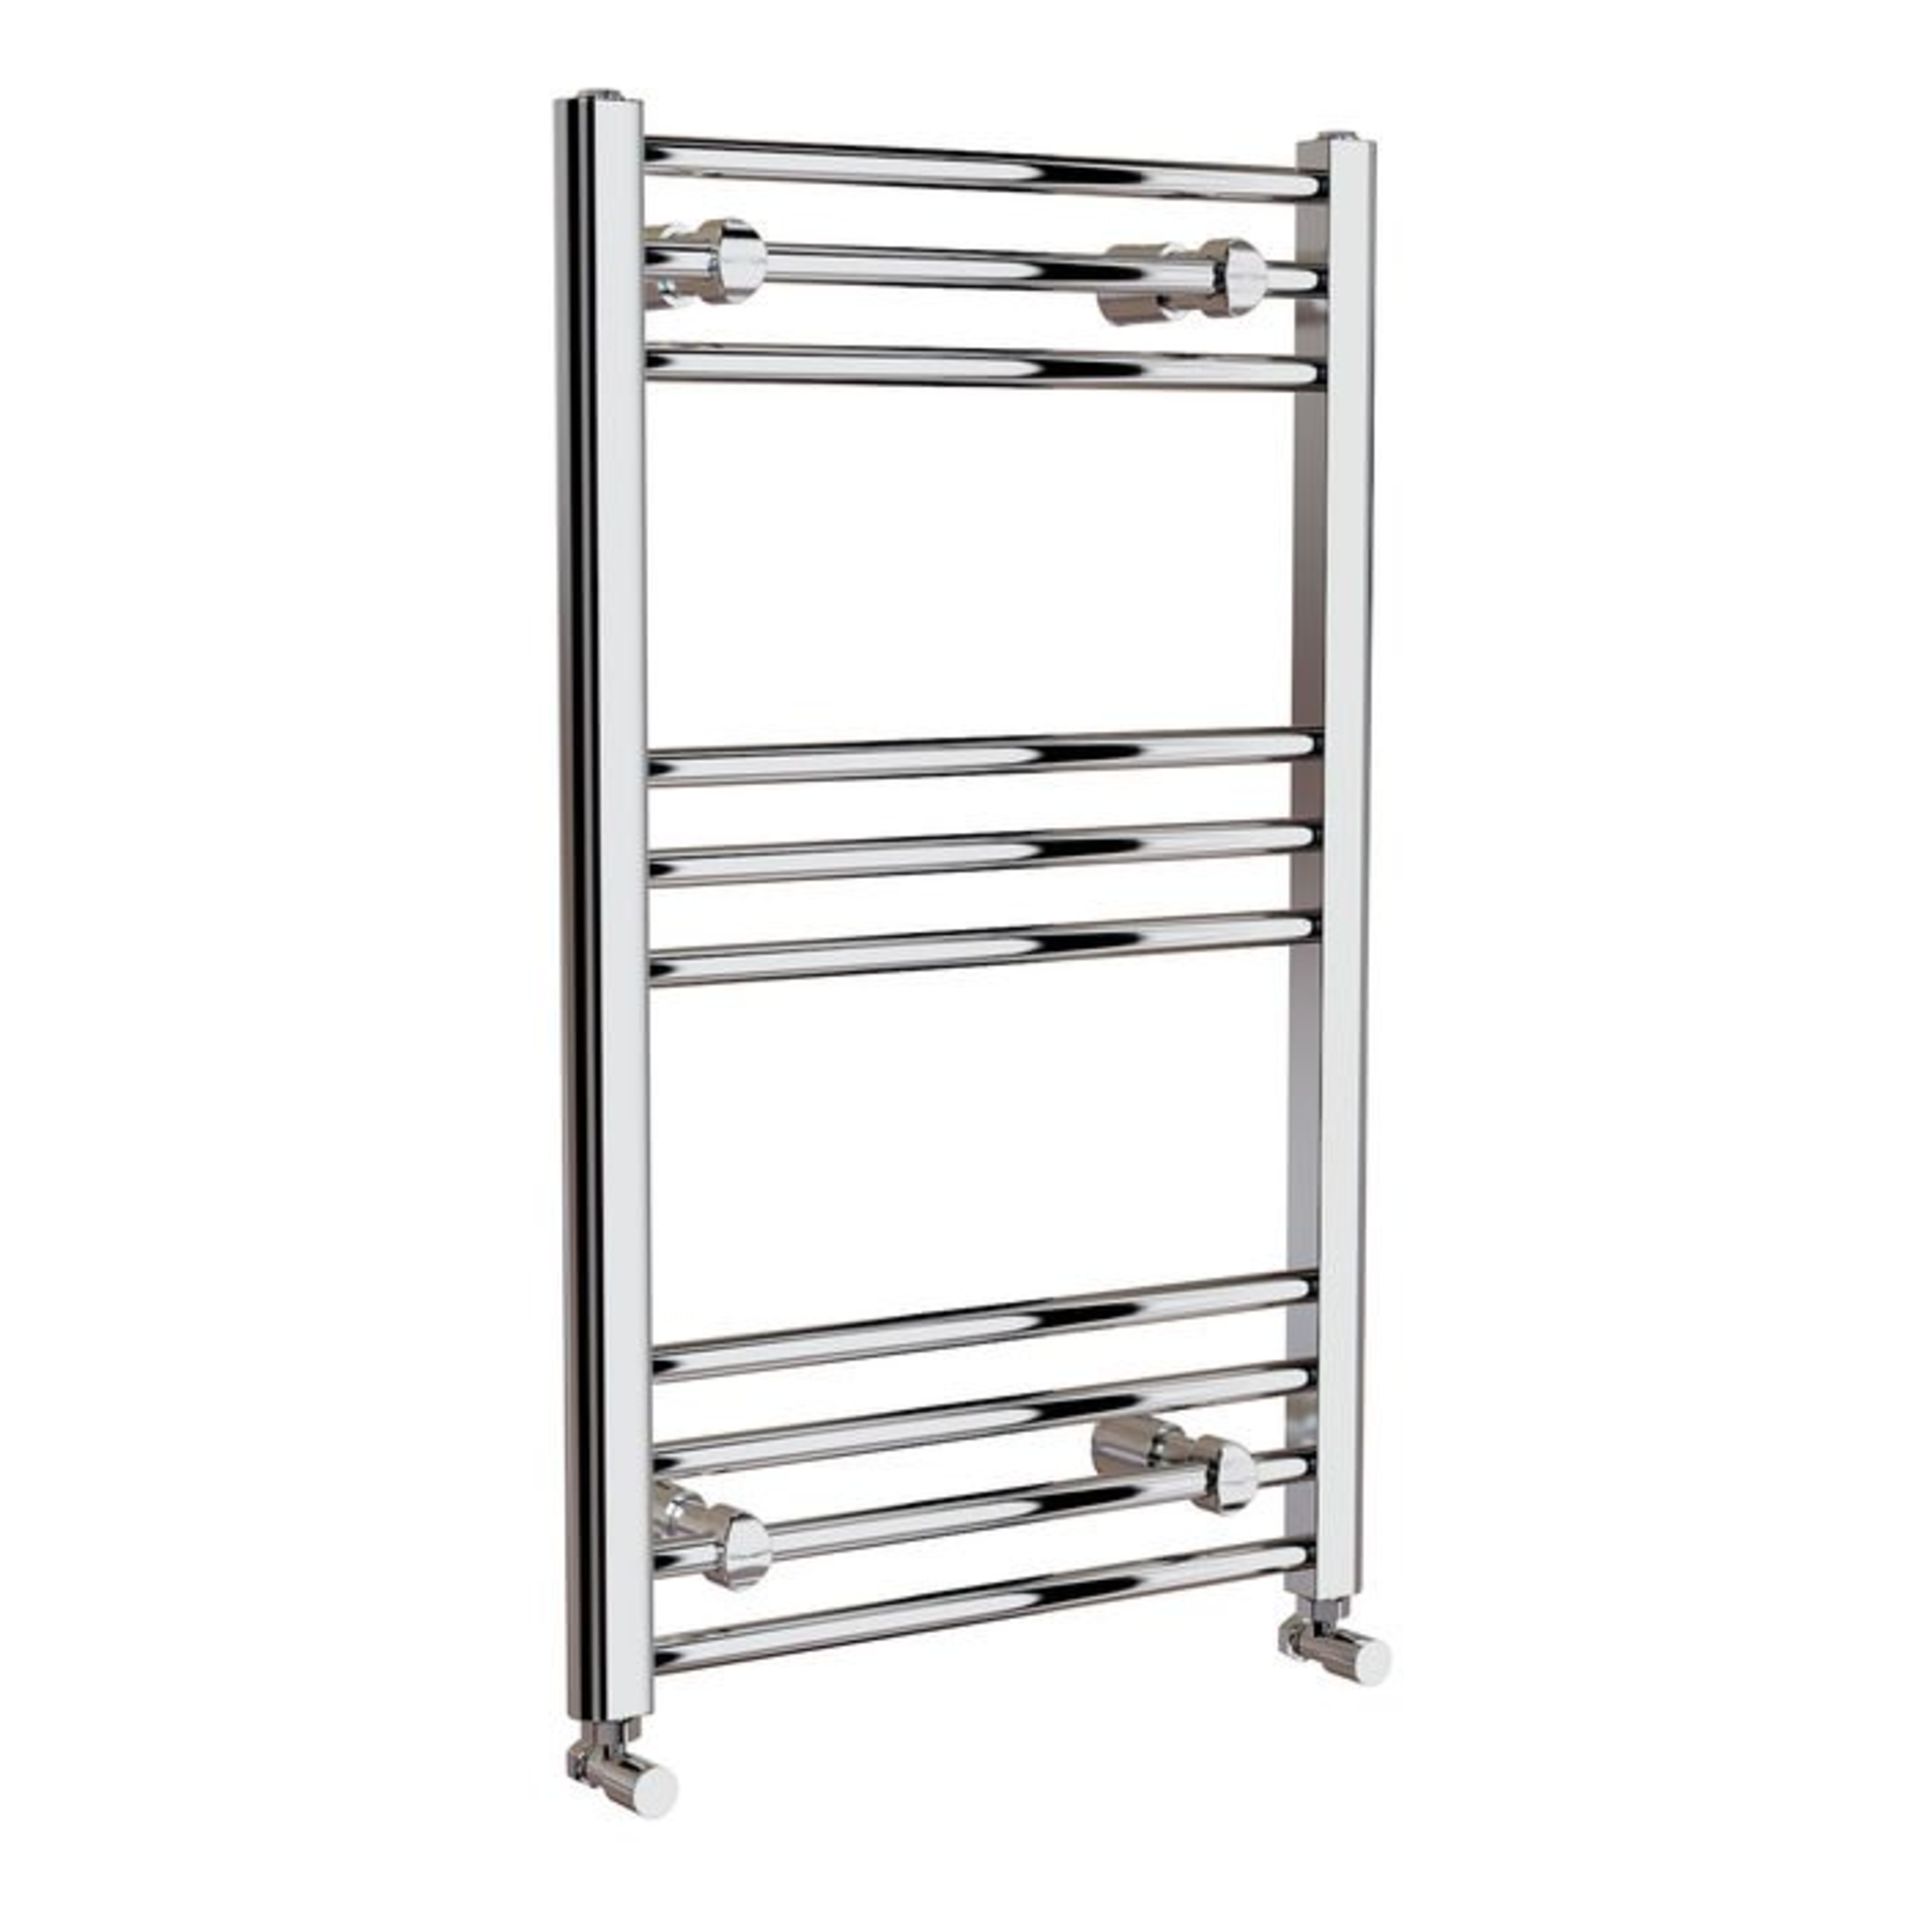 (G100) 800x500mm - 20mm Tubes - Chrome Heated Straight Rail Ladder Towel Radiator Low carbon steel - Image 3 of 3